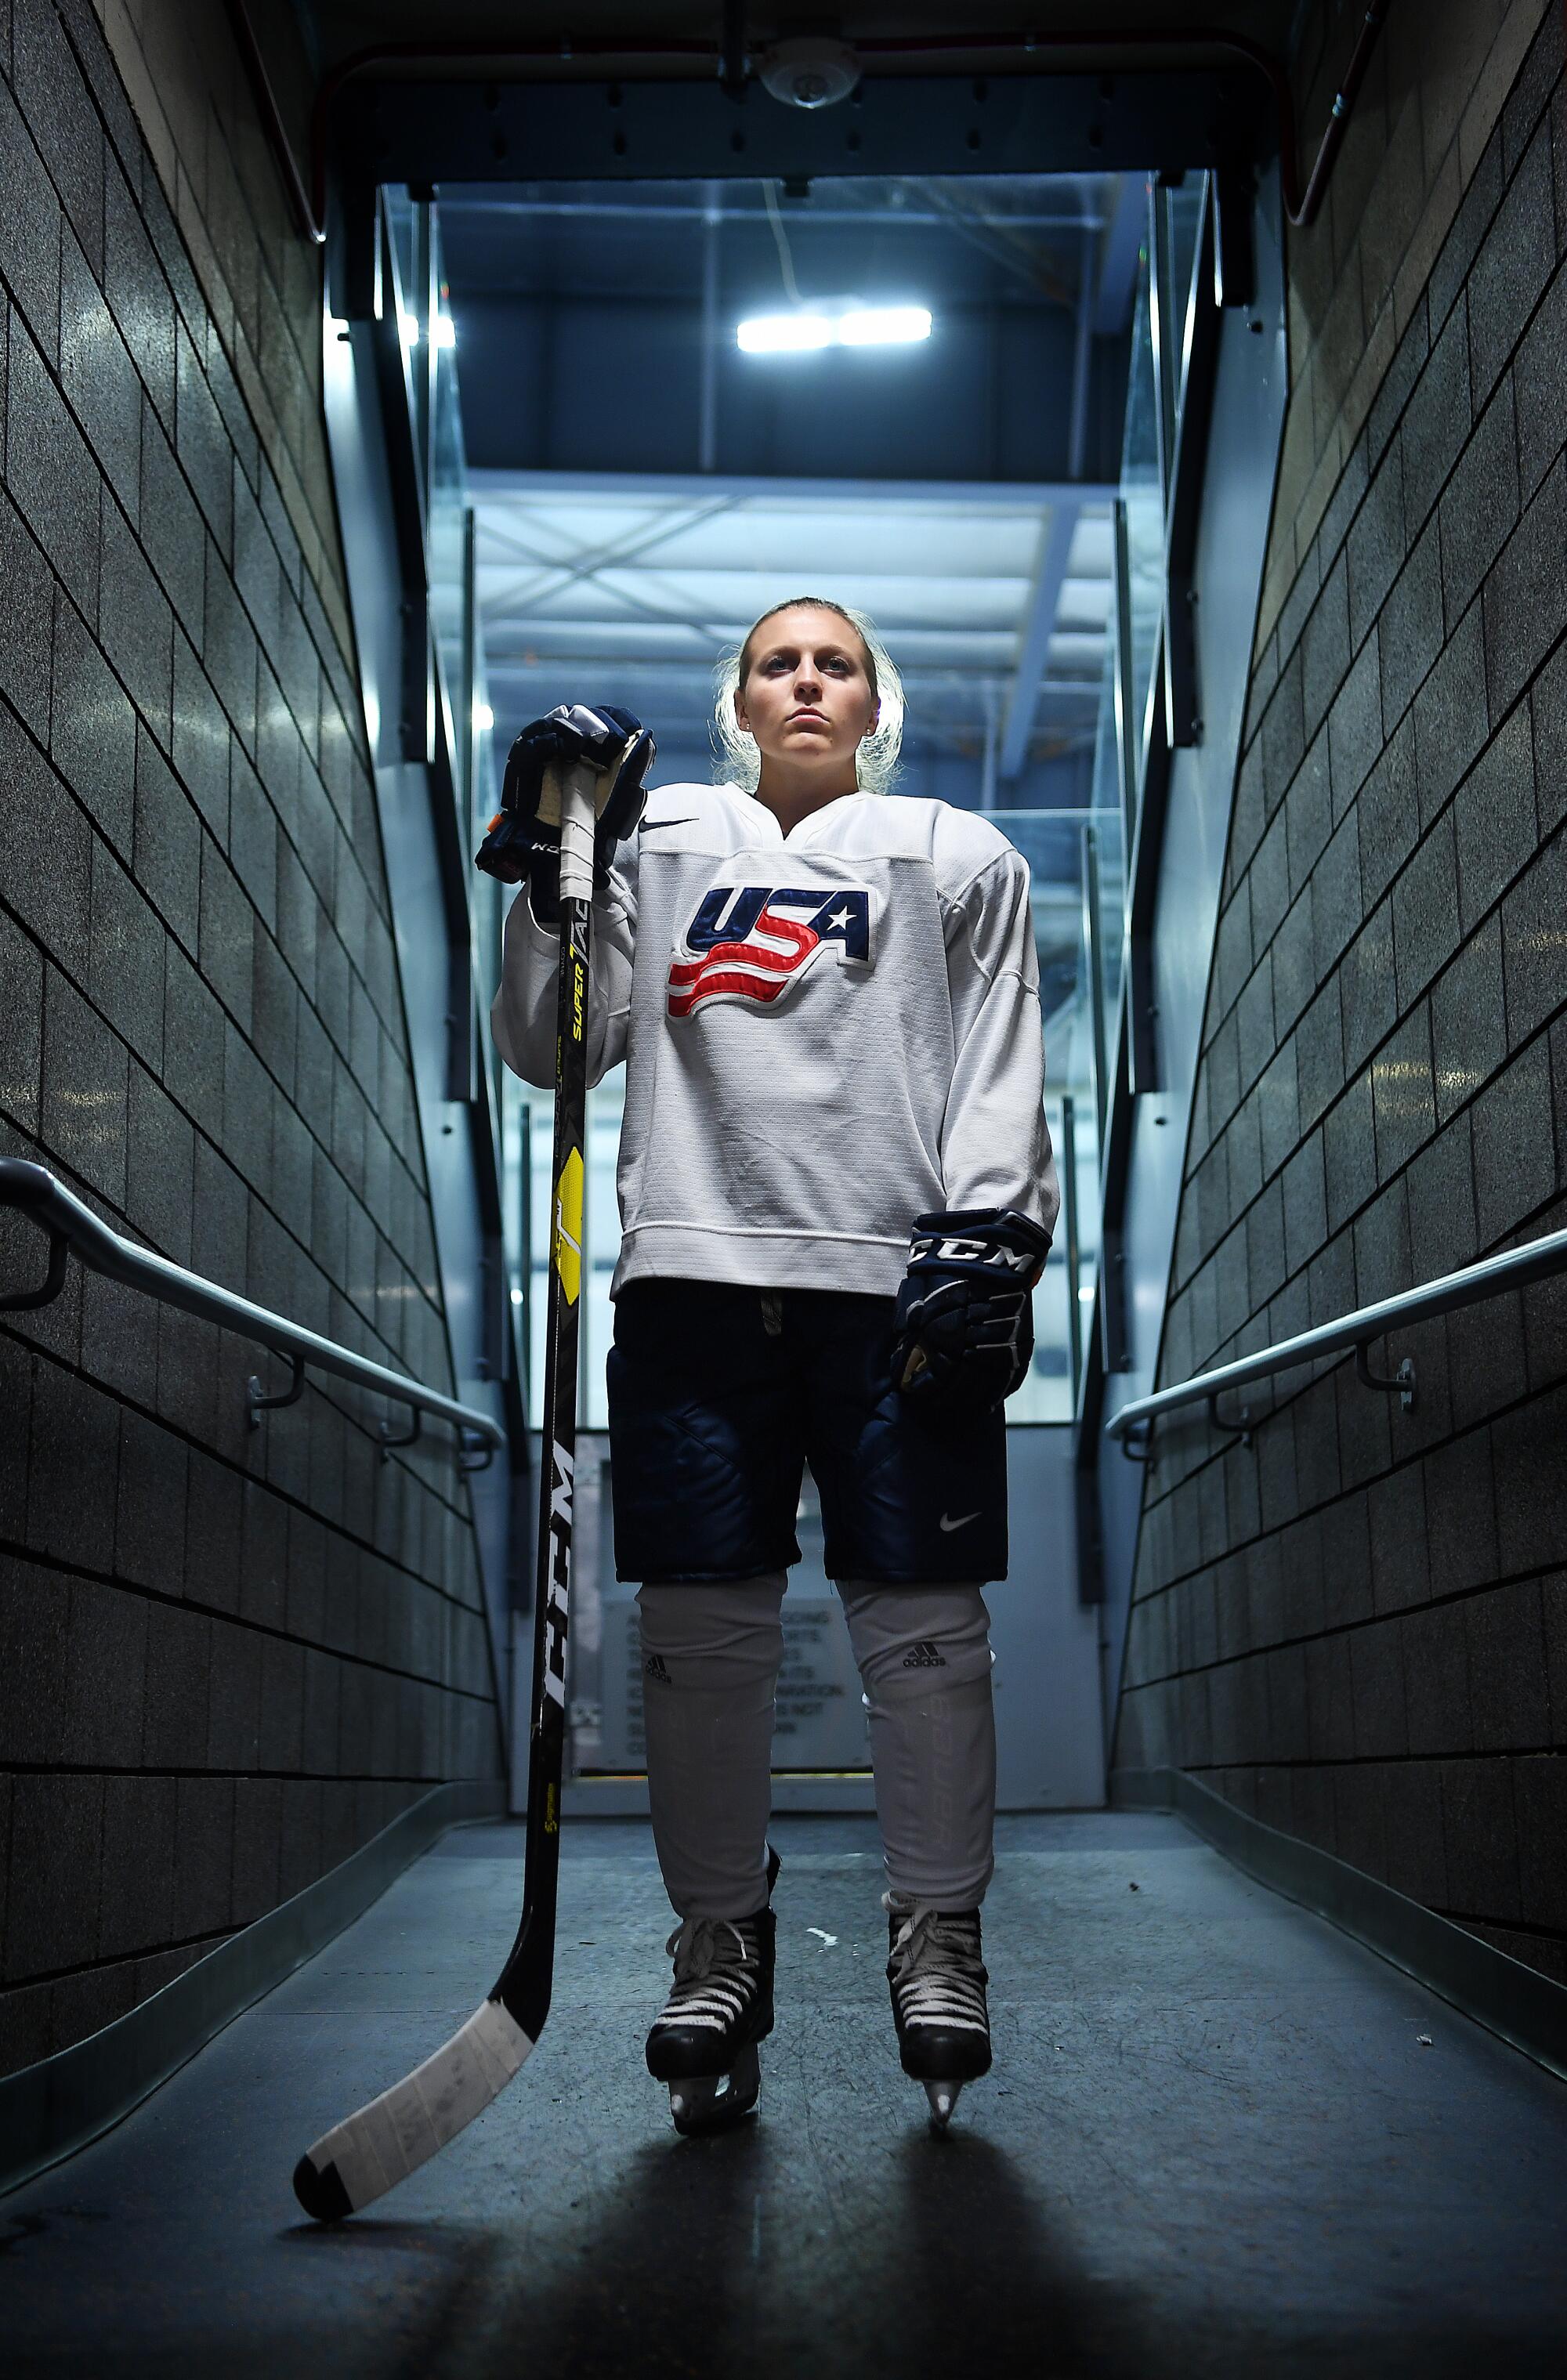 Kendall Coyne Schofield is photographed at Great Park Ice in Irvine.